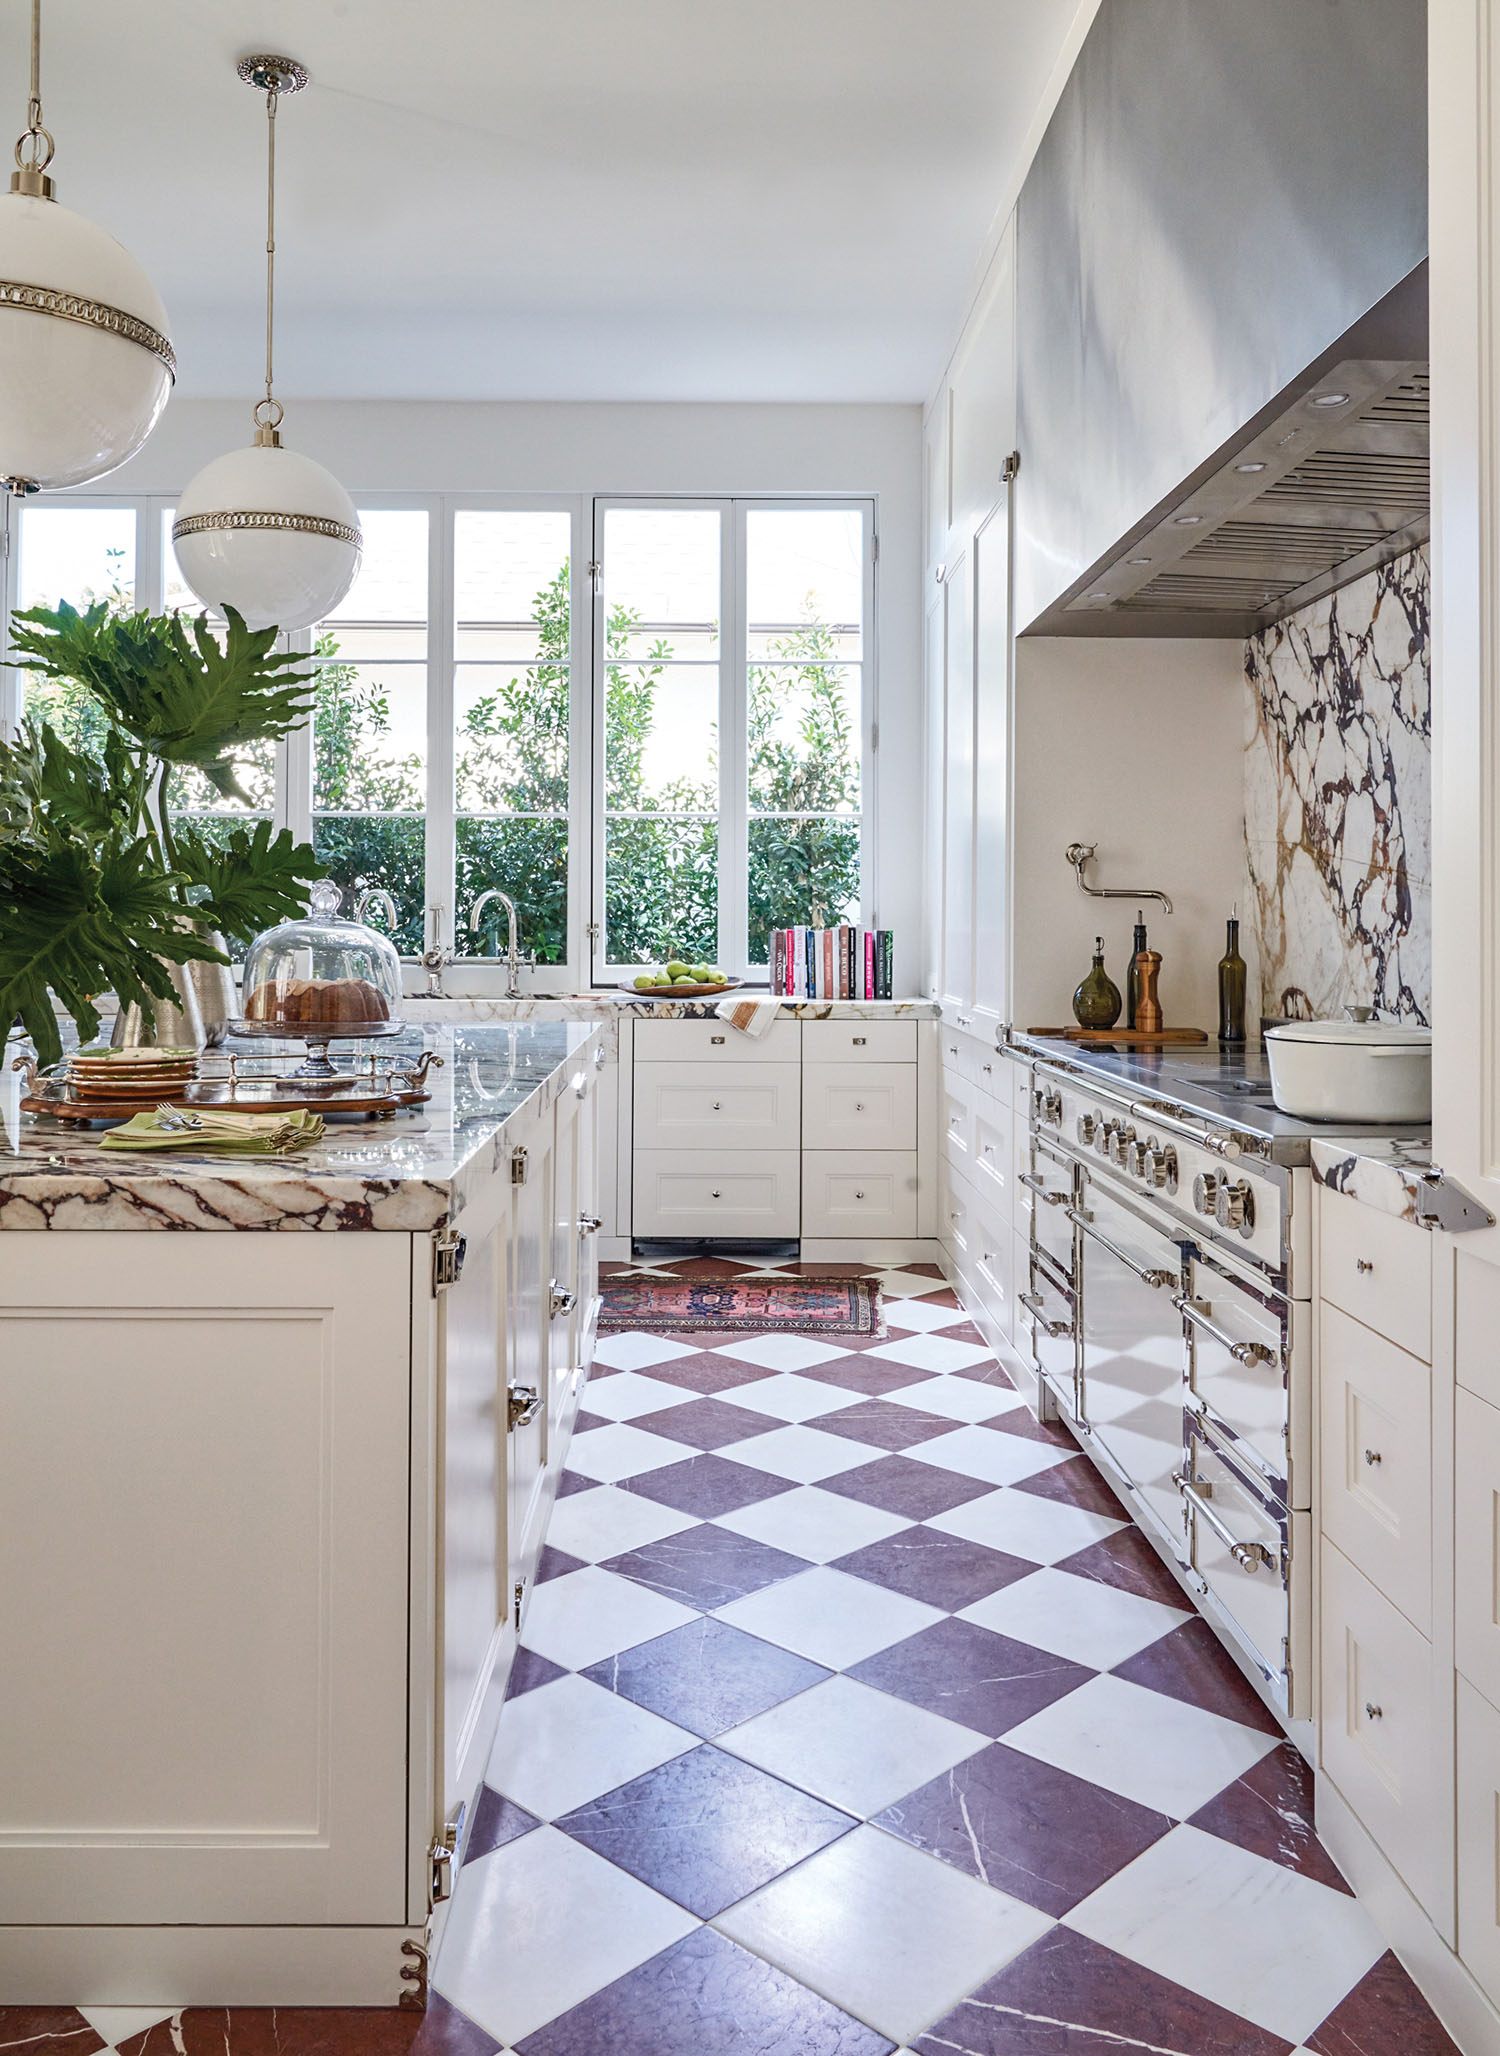 Cream colored kitchen cabinets and appliances with a brown checkerboard floor.